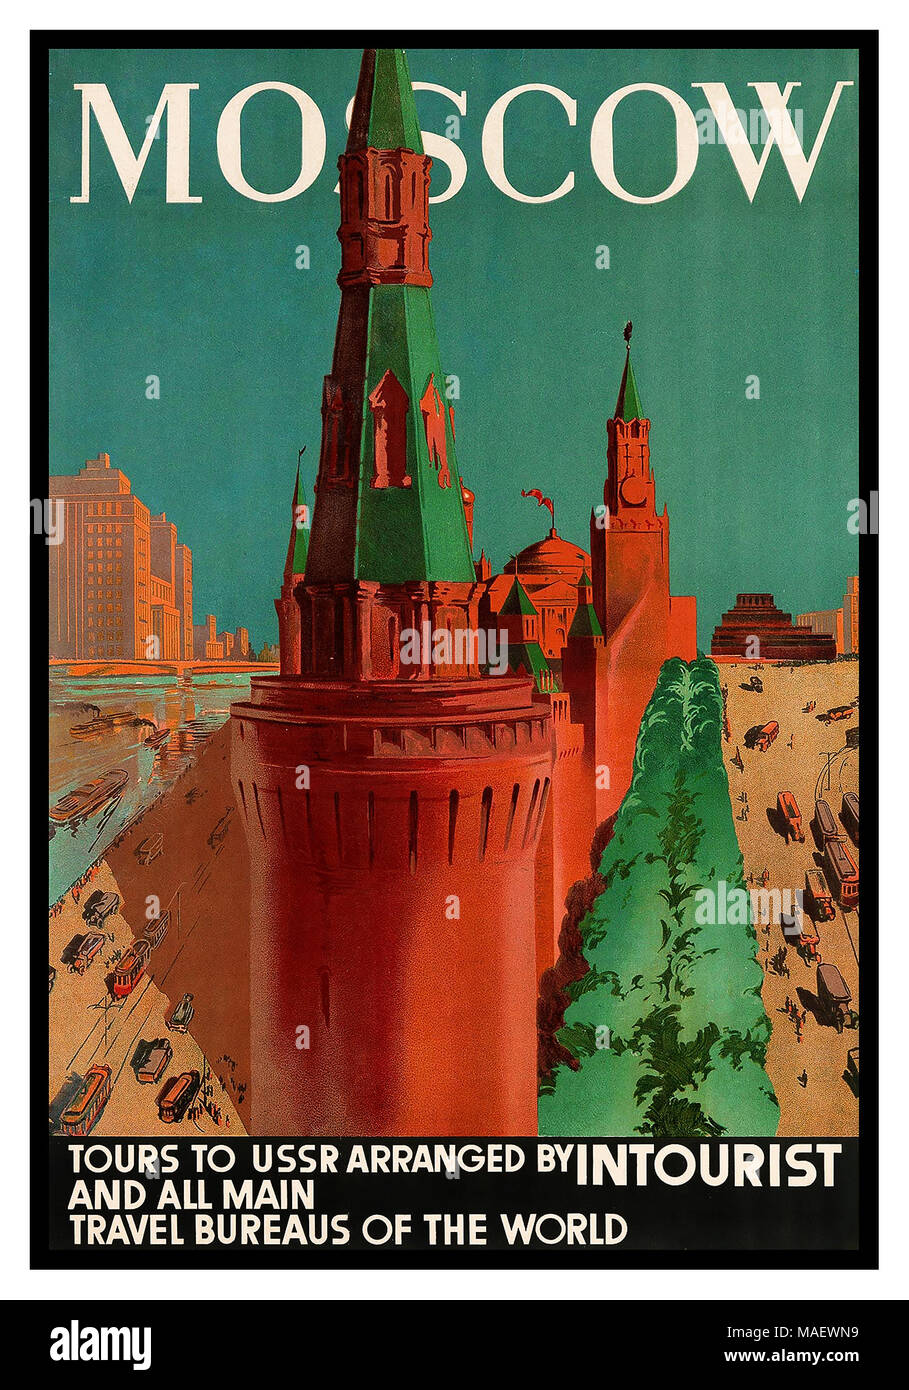 Vintage Russian Travel Poster Moscow / Intourist travel agency circa 1930s. Stock Photo